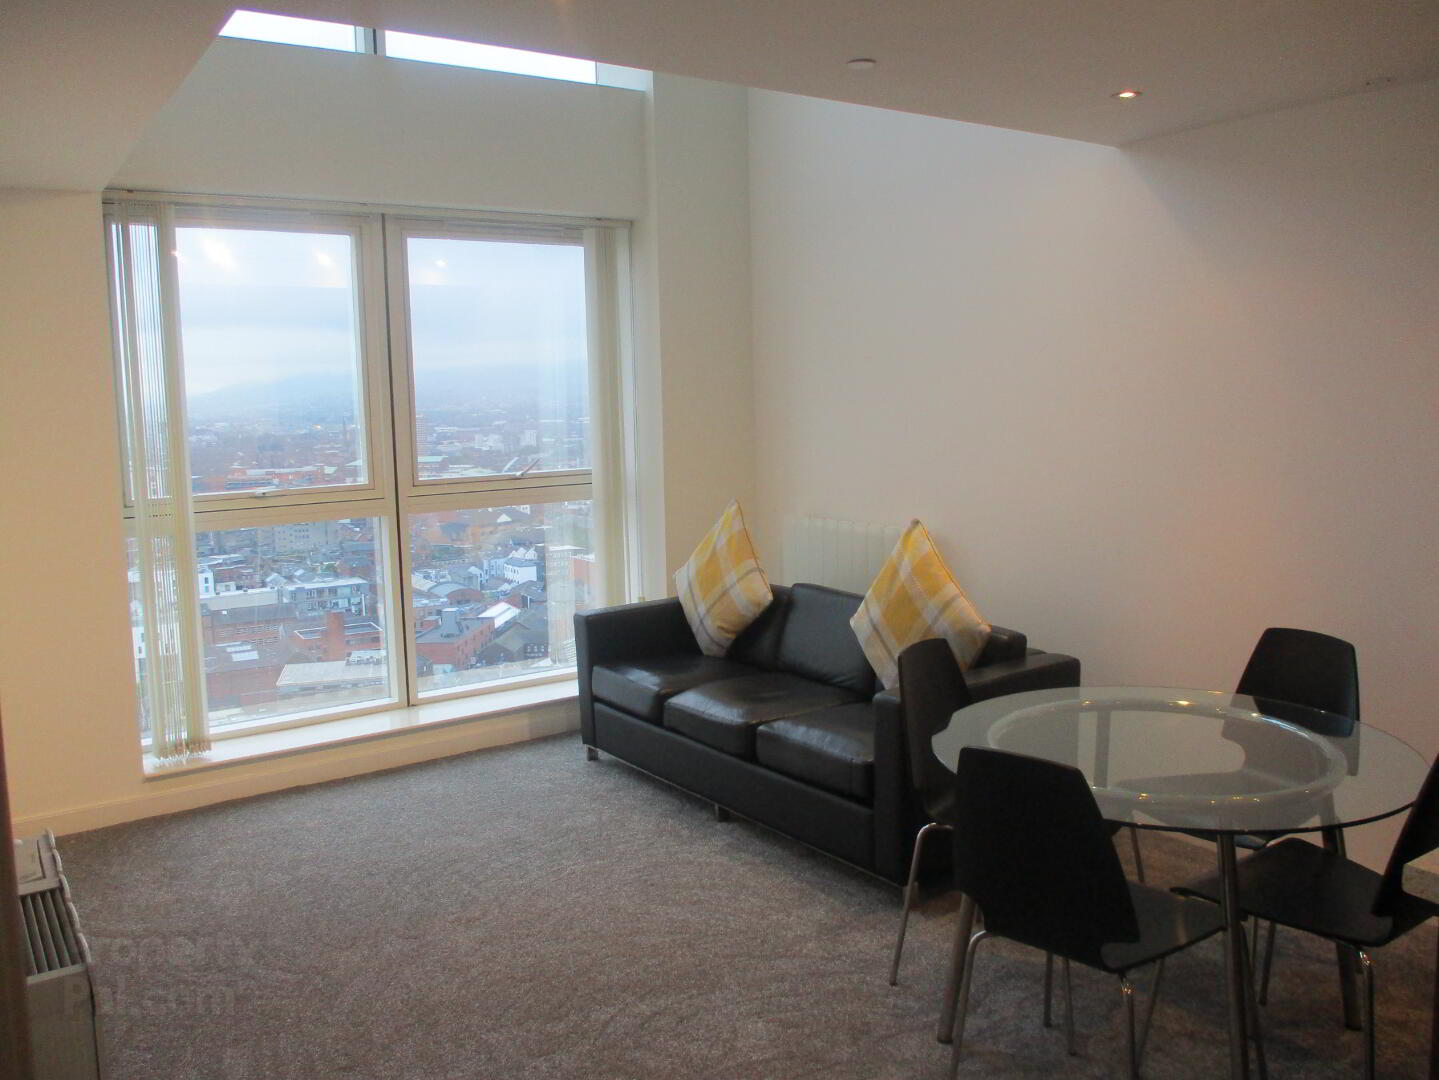 25-03 Apartment 25-03 Obel Tower, 62 Donegall Quay